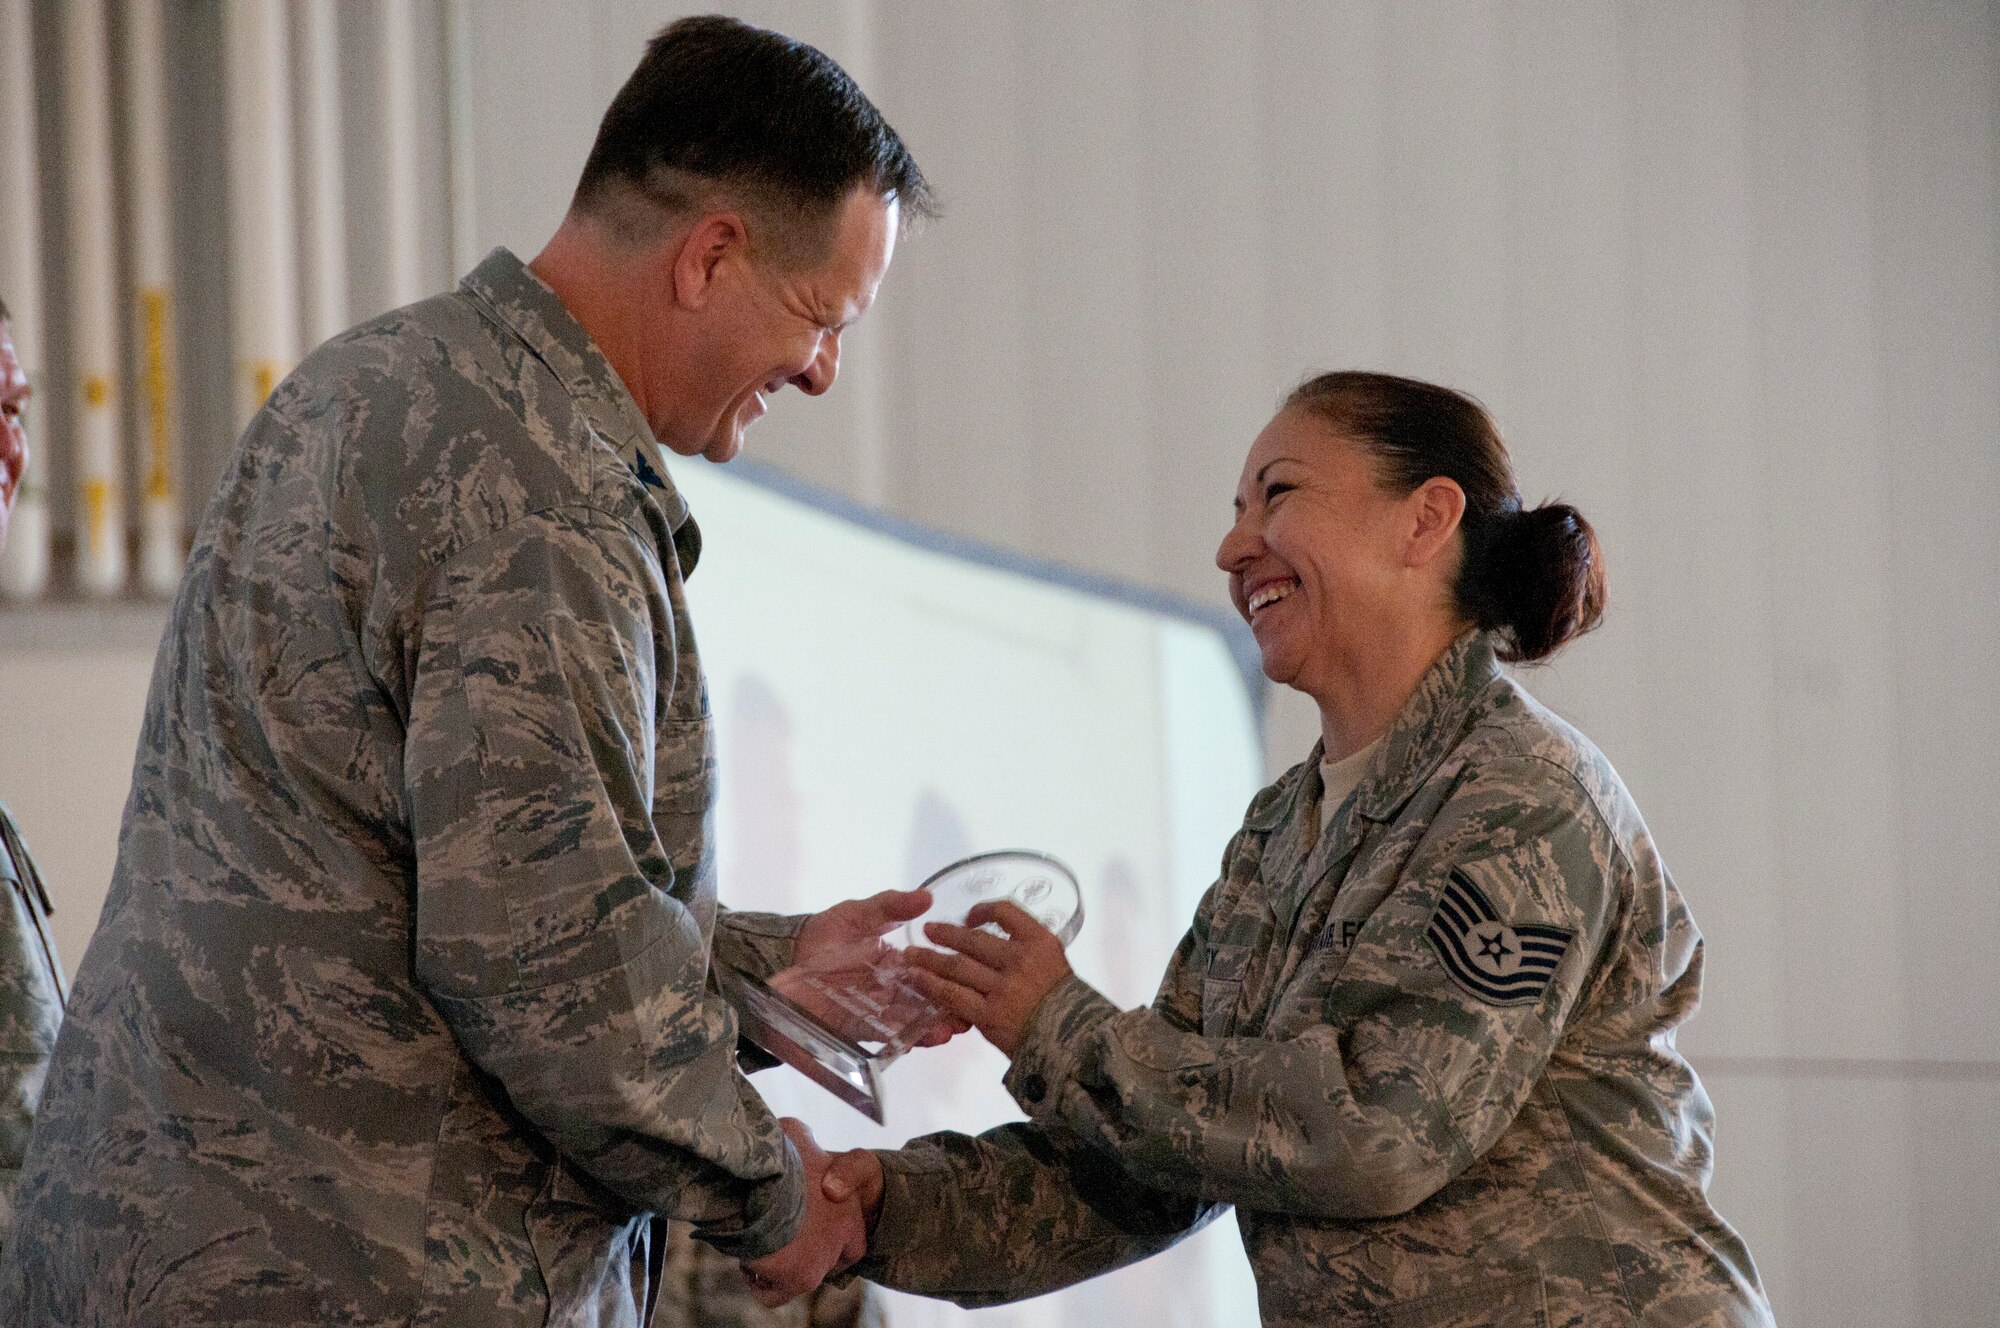 Tech. Sgt. Irasema Perry, contracting officer representative for the 162nd Fighter Wing, is awarded NCO of the Year by Col. Michael McGuire, 162nd Fighter Wing commander, Nov. 3 during the wing’s annual awards ceremony. U.S Air Force Photo by Tech. Sgt. Hollie Hansen. 